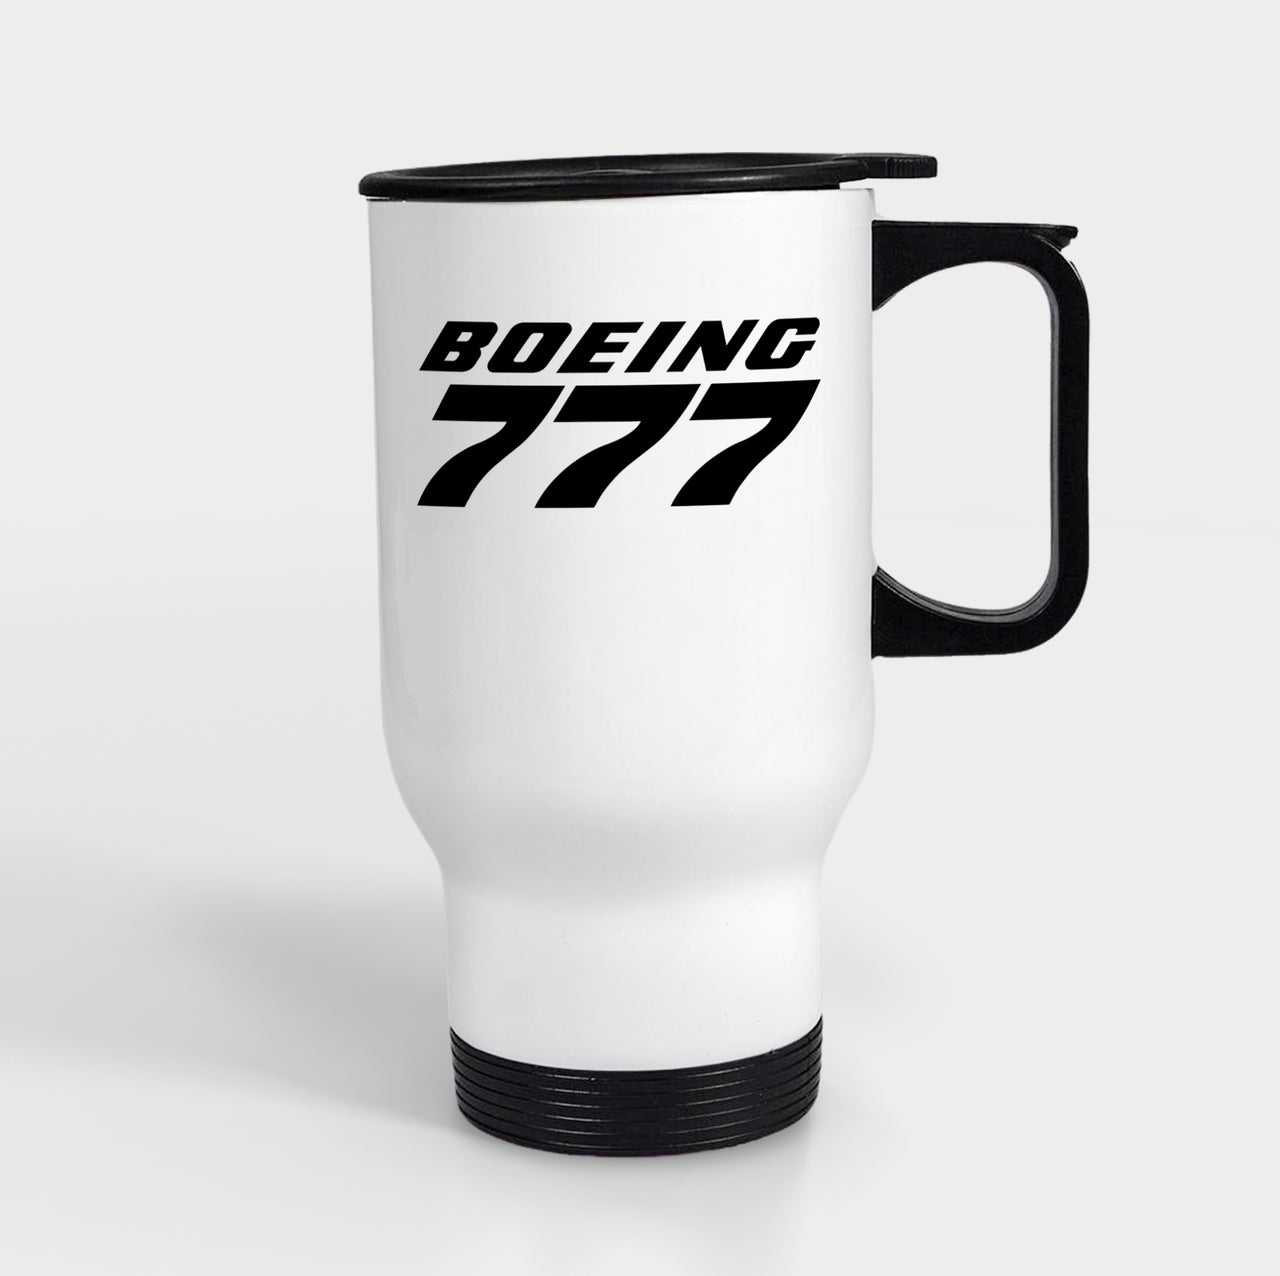 Boeing 777 & Text Designed Travel Mugs (With Holder)